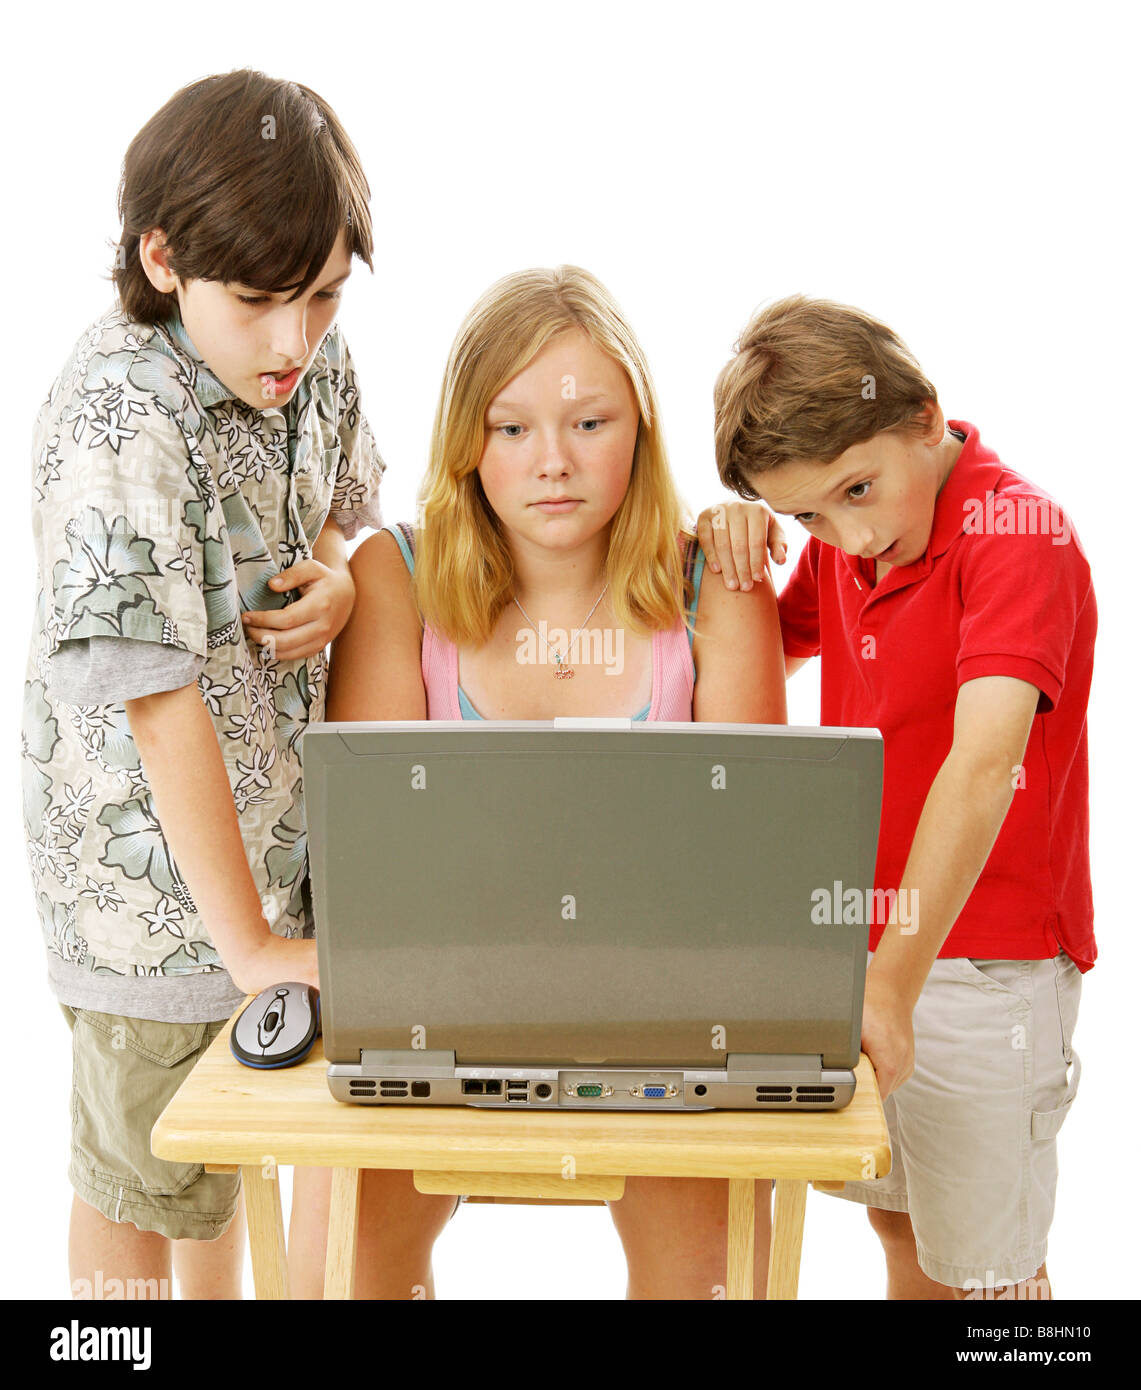 Three children on the computer with serious confused expressions Isolated on white Stock Photo